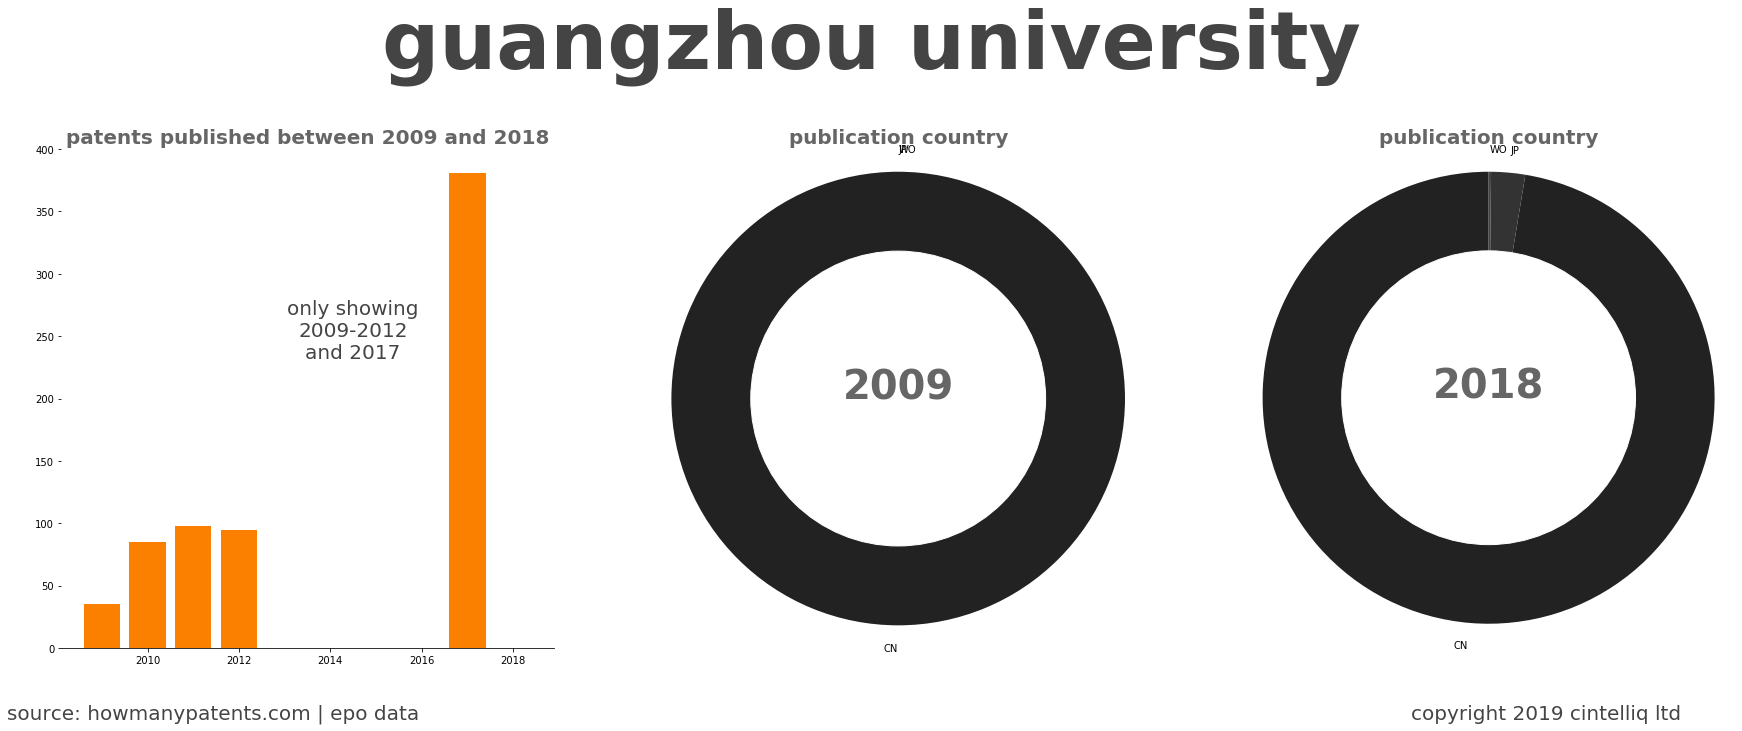 summary of patents for Guangzhou University